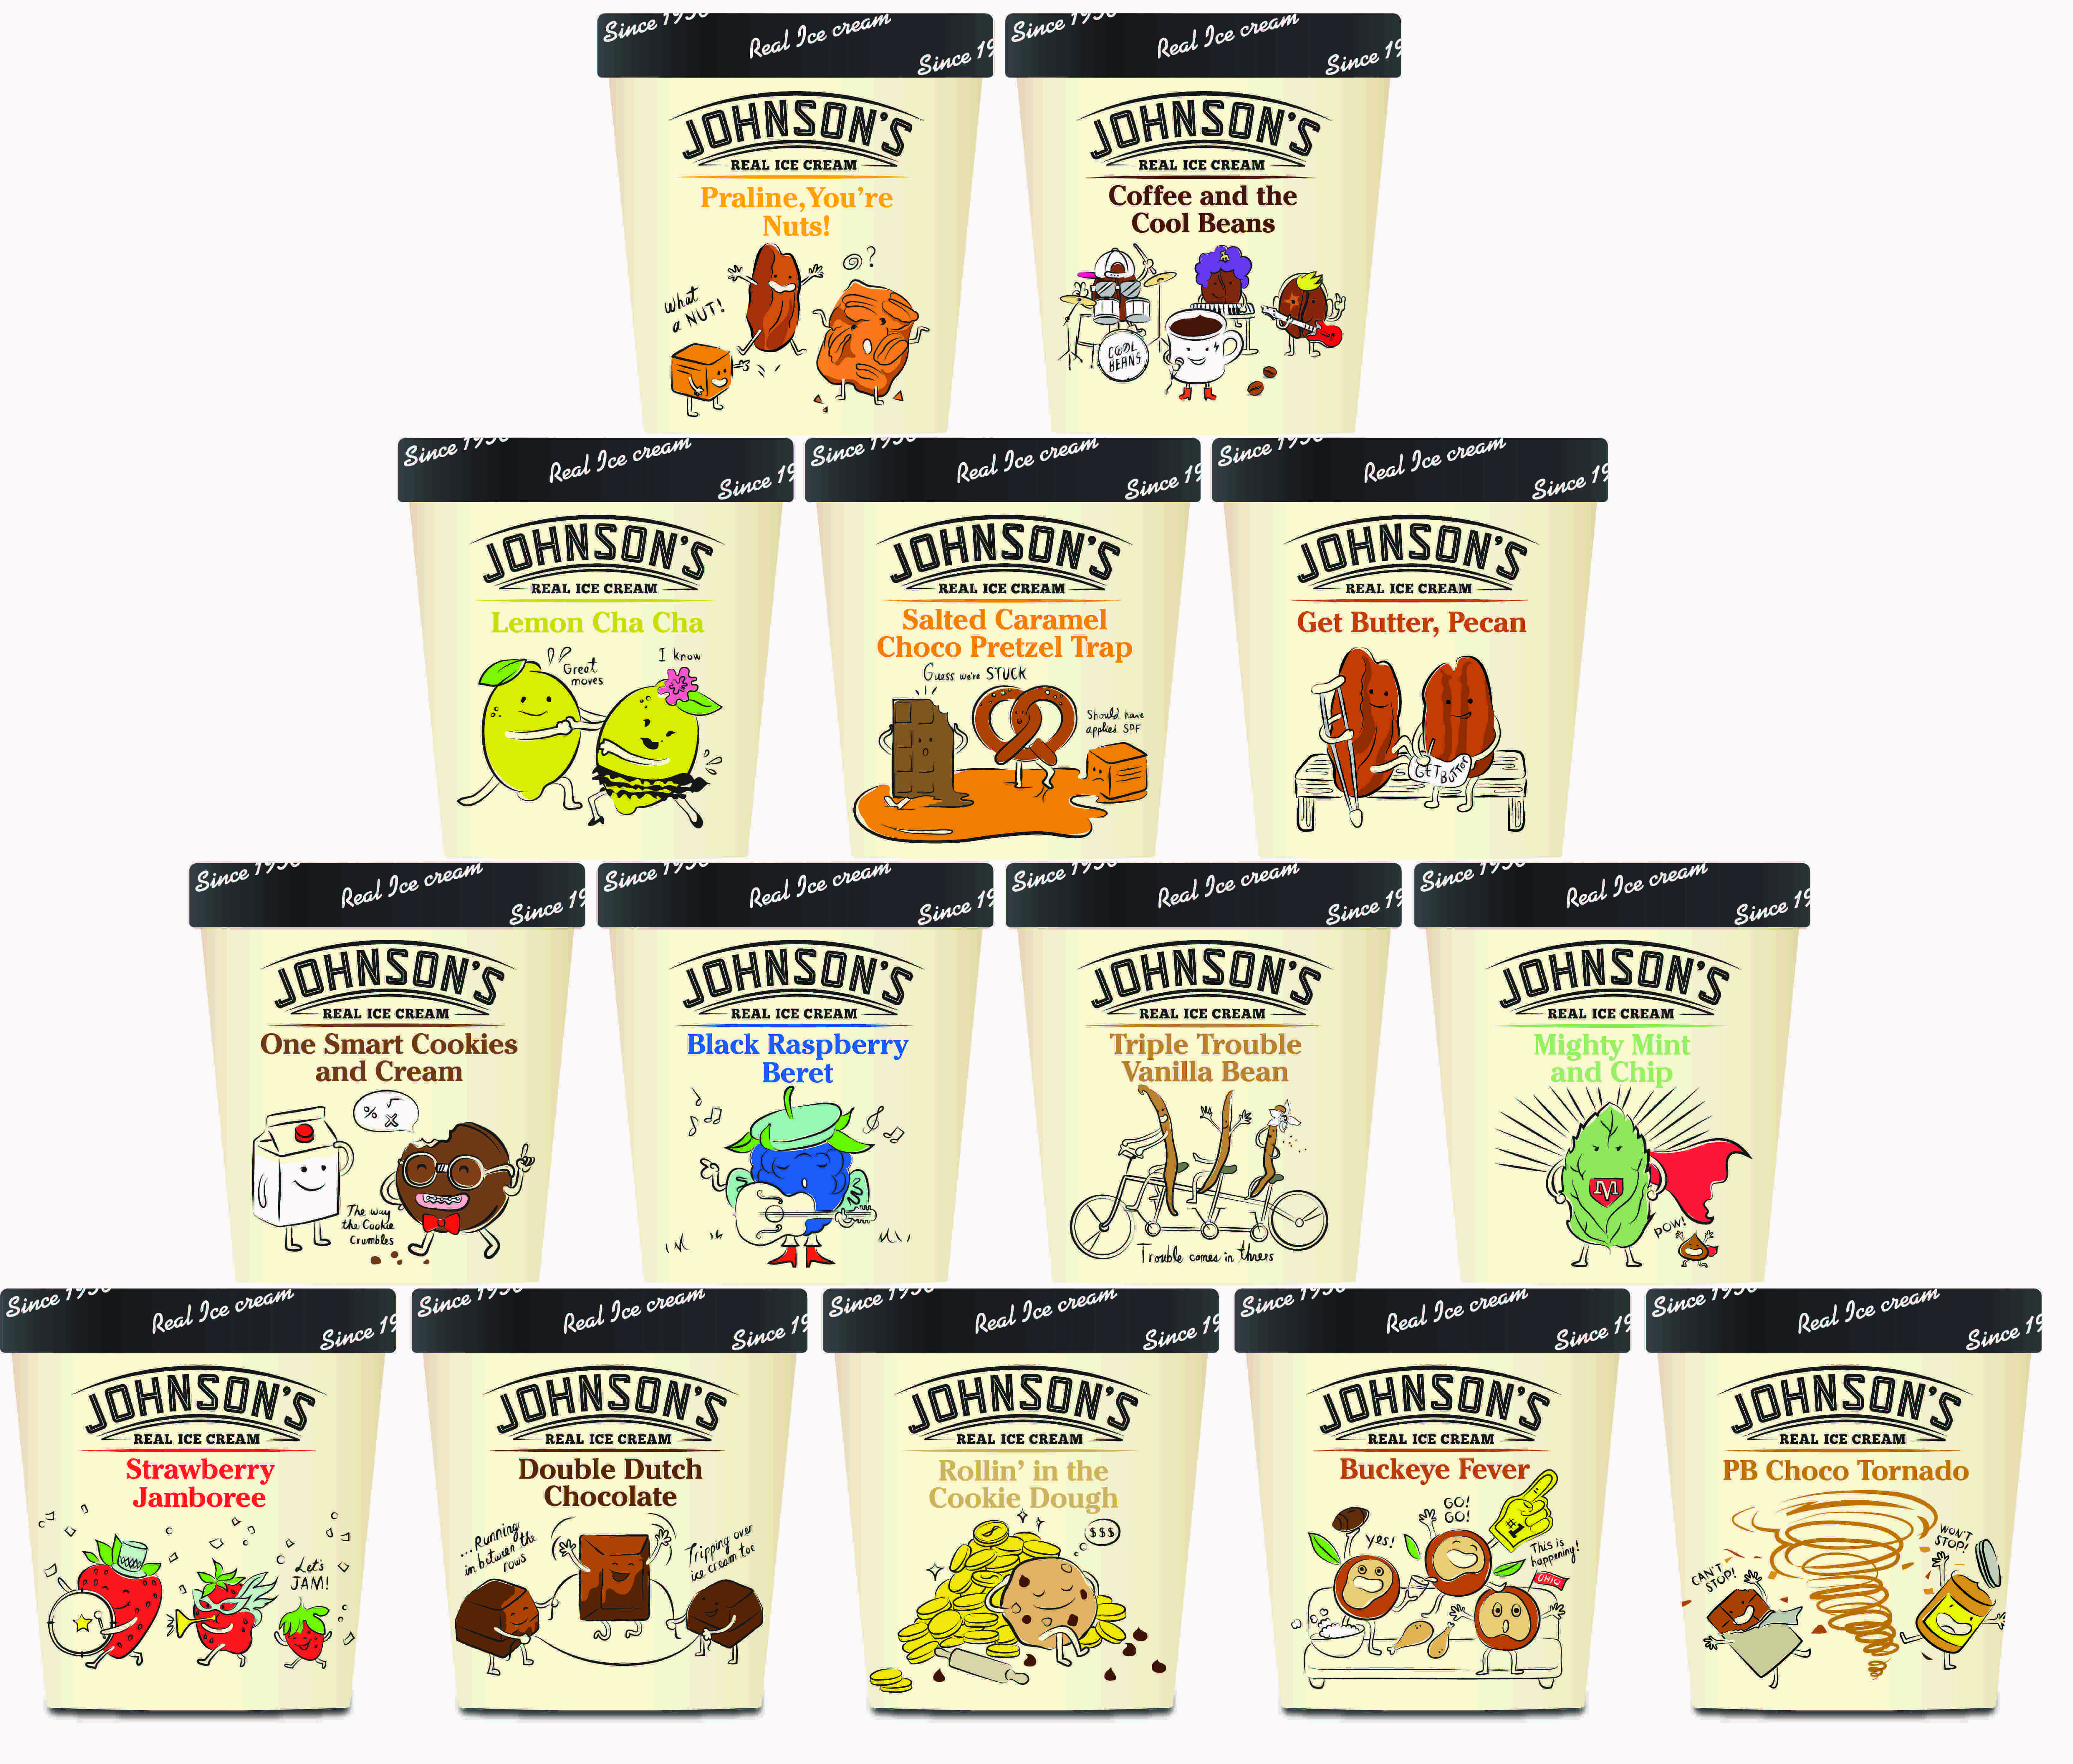 Sampling of Johnson's new Specialty Line of Real Ice Creams.